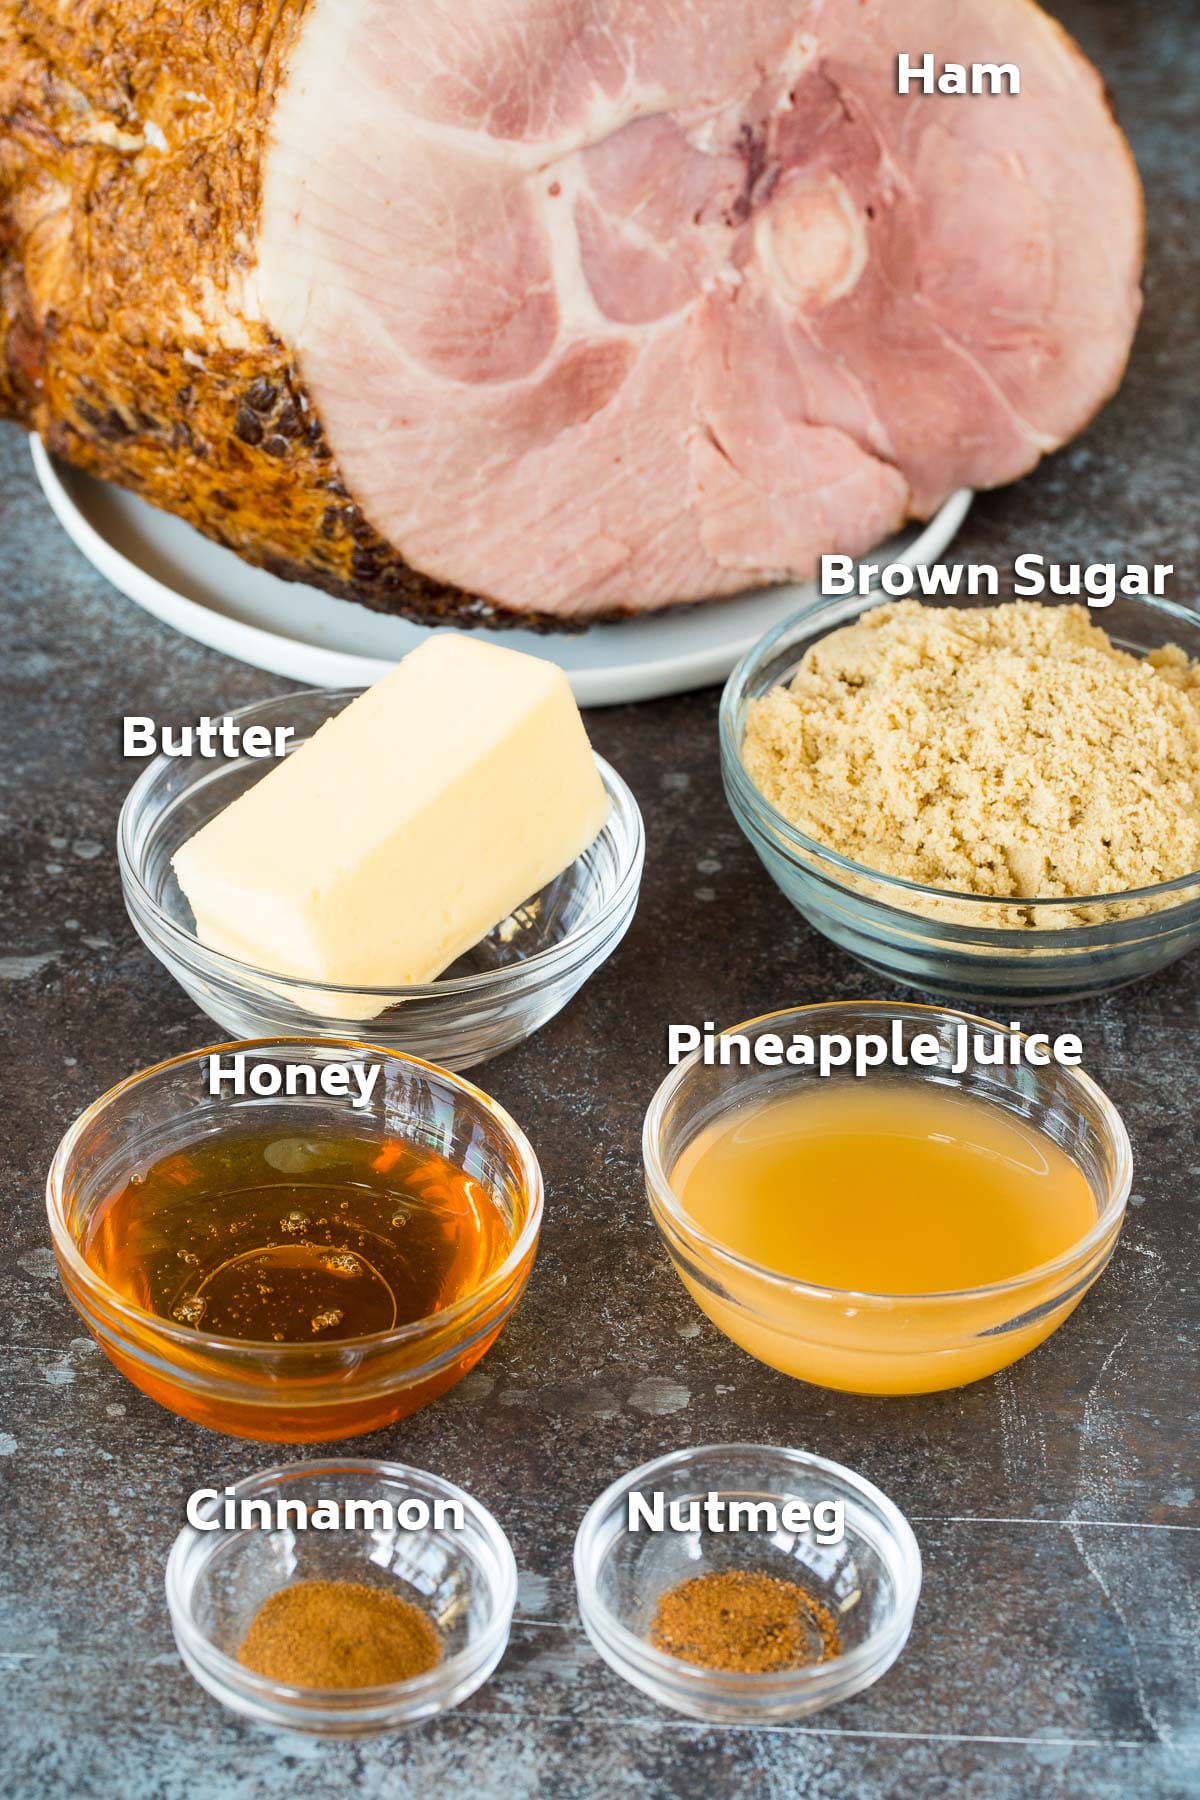 Ingredients including ham, brown sugar, pineapple juice and spices.